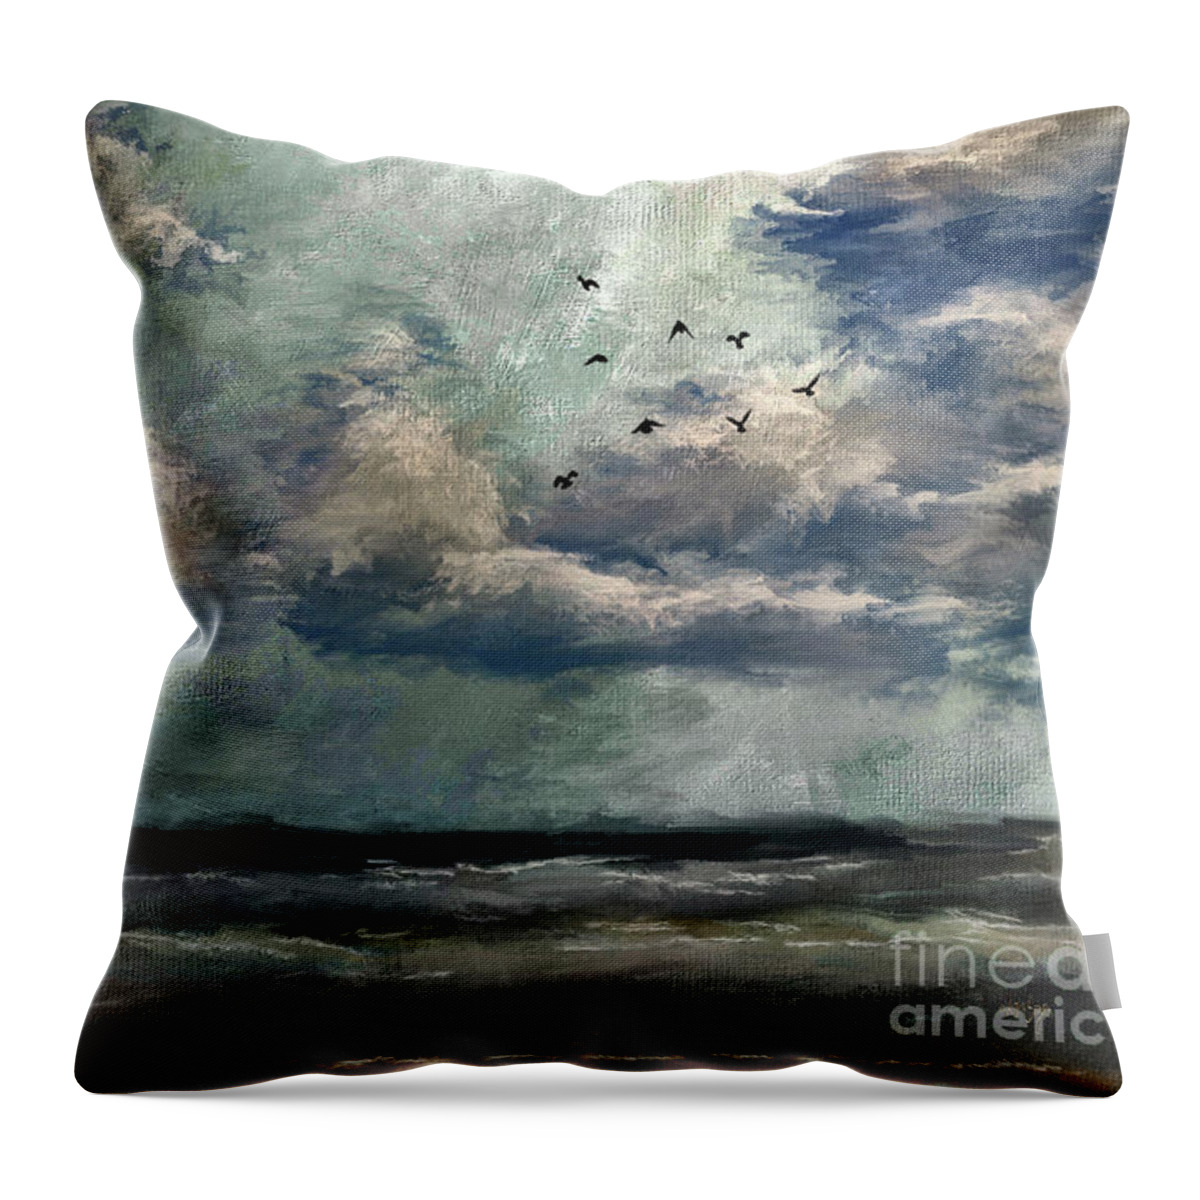 Ocean Throw Pillow featuring the digital art Into The Light by Lois Bryan